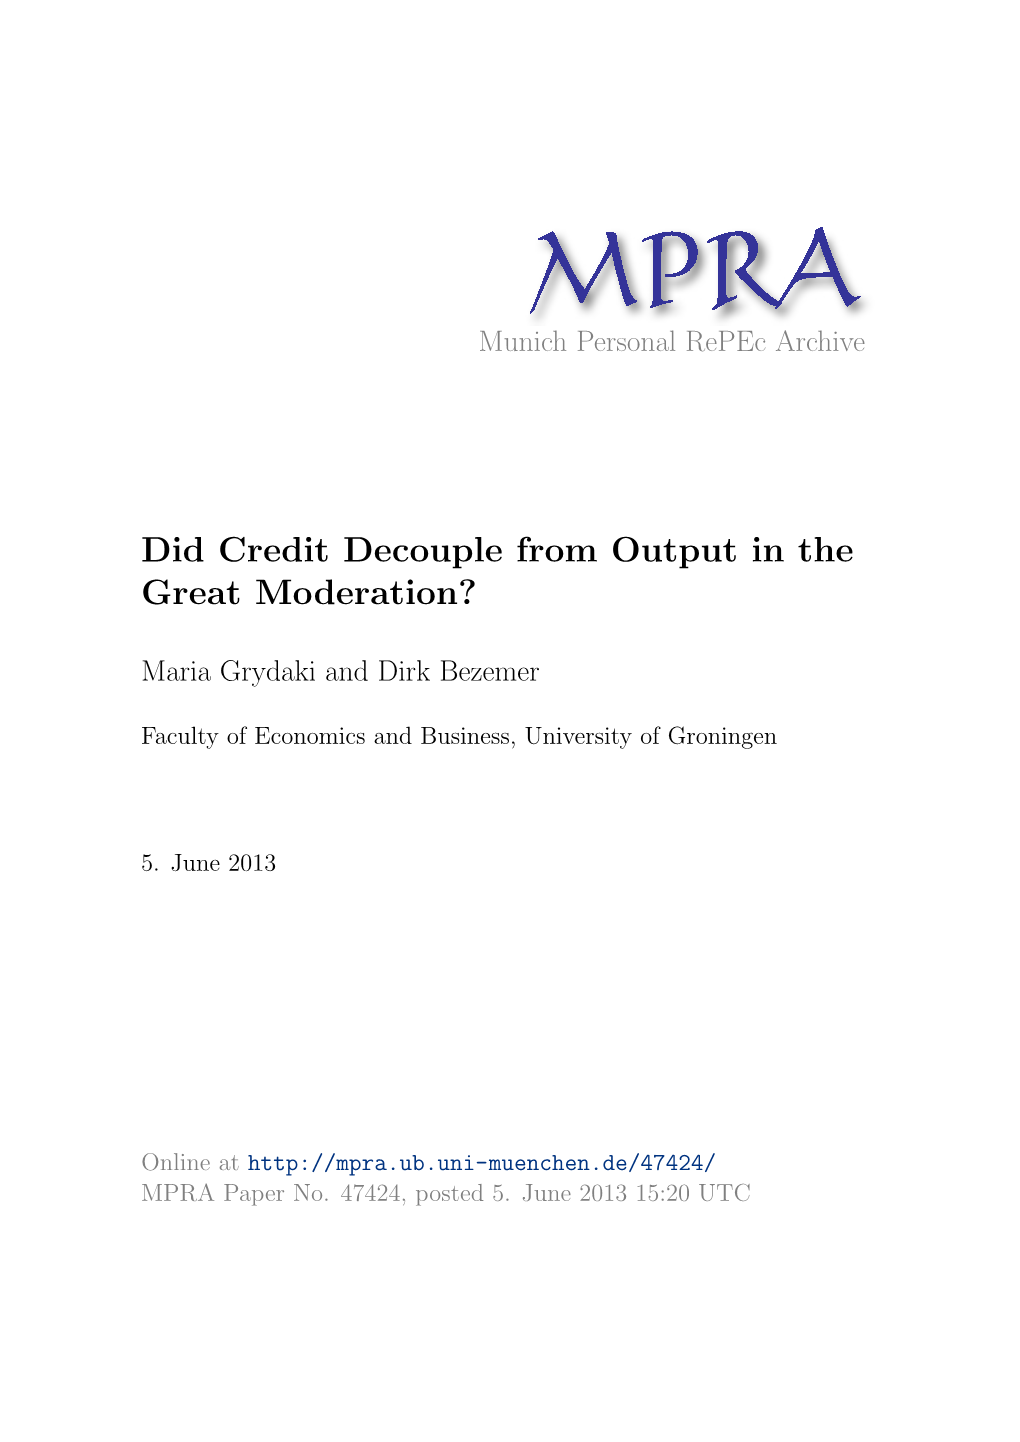 Did Credit Decouple from Output in the Great Moderation?